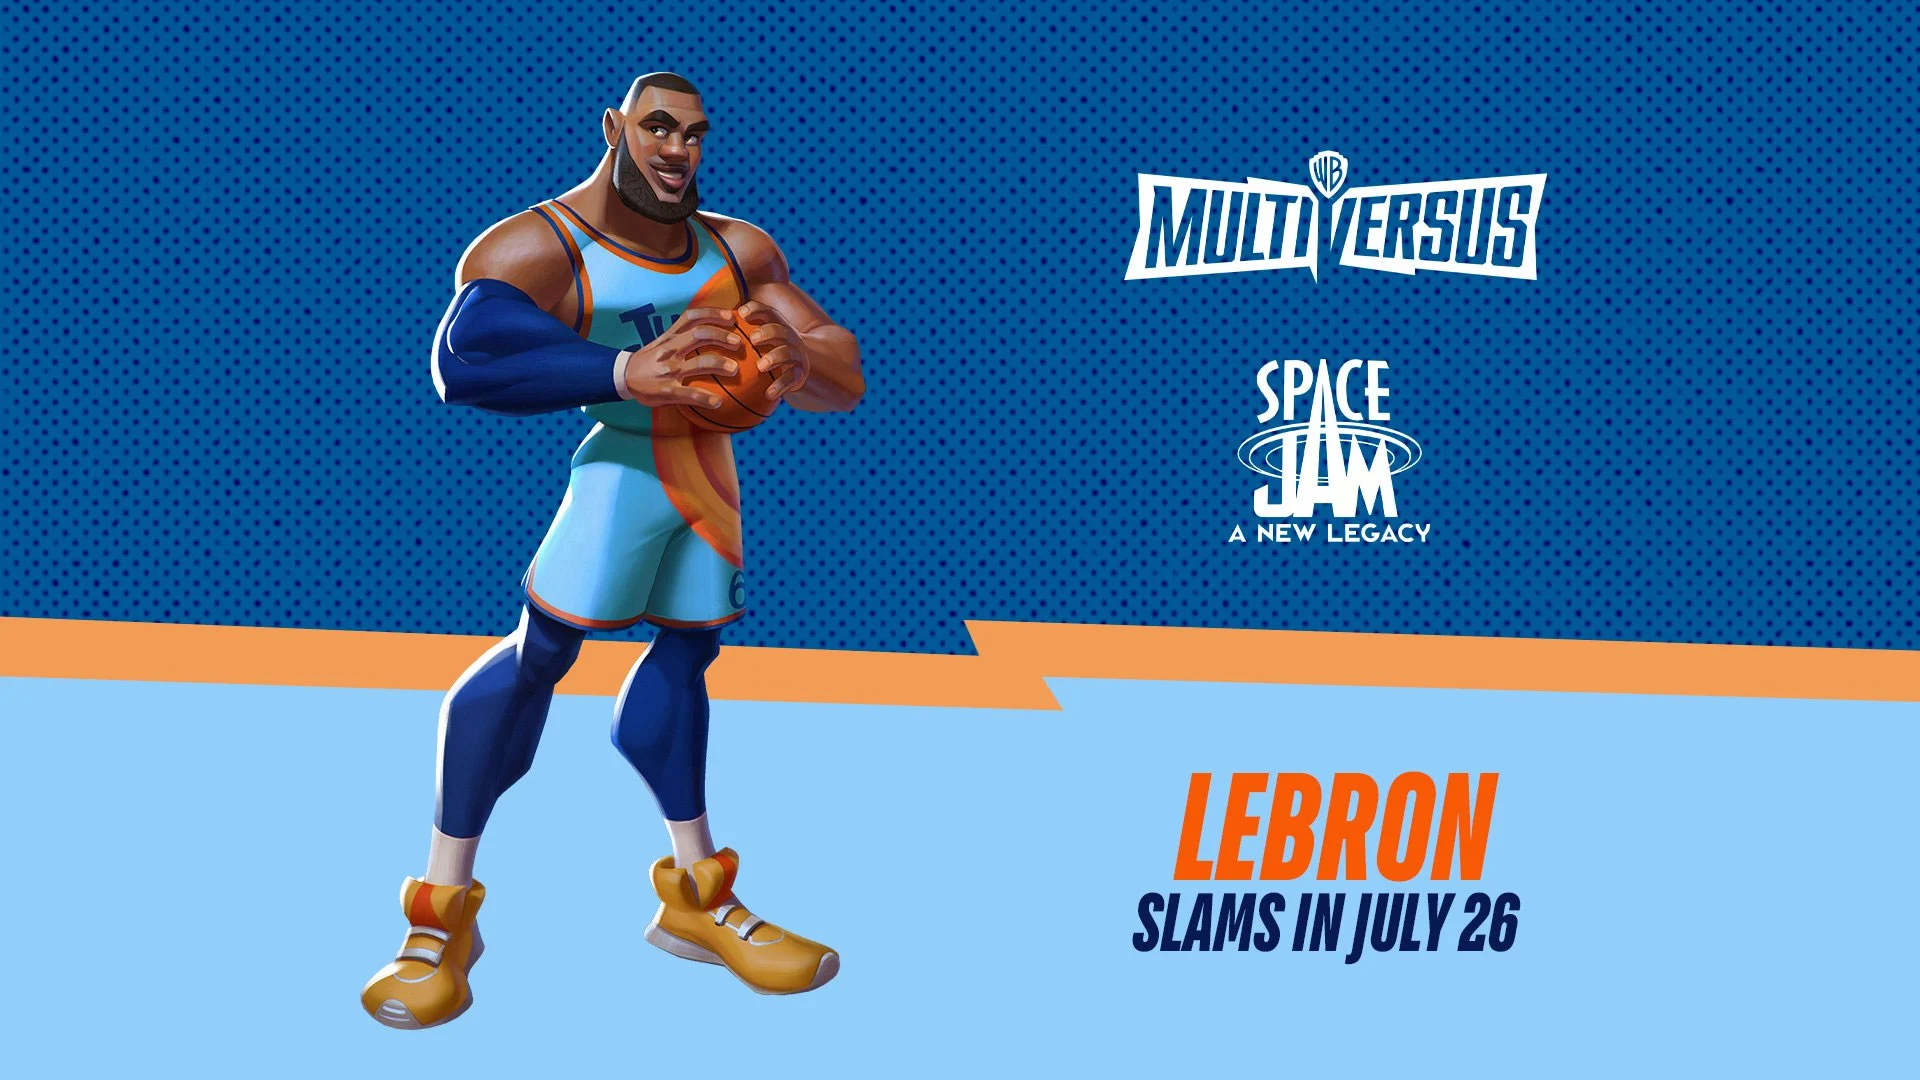 Lebron and Rick and Morty Coming to MultiVersus